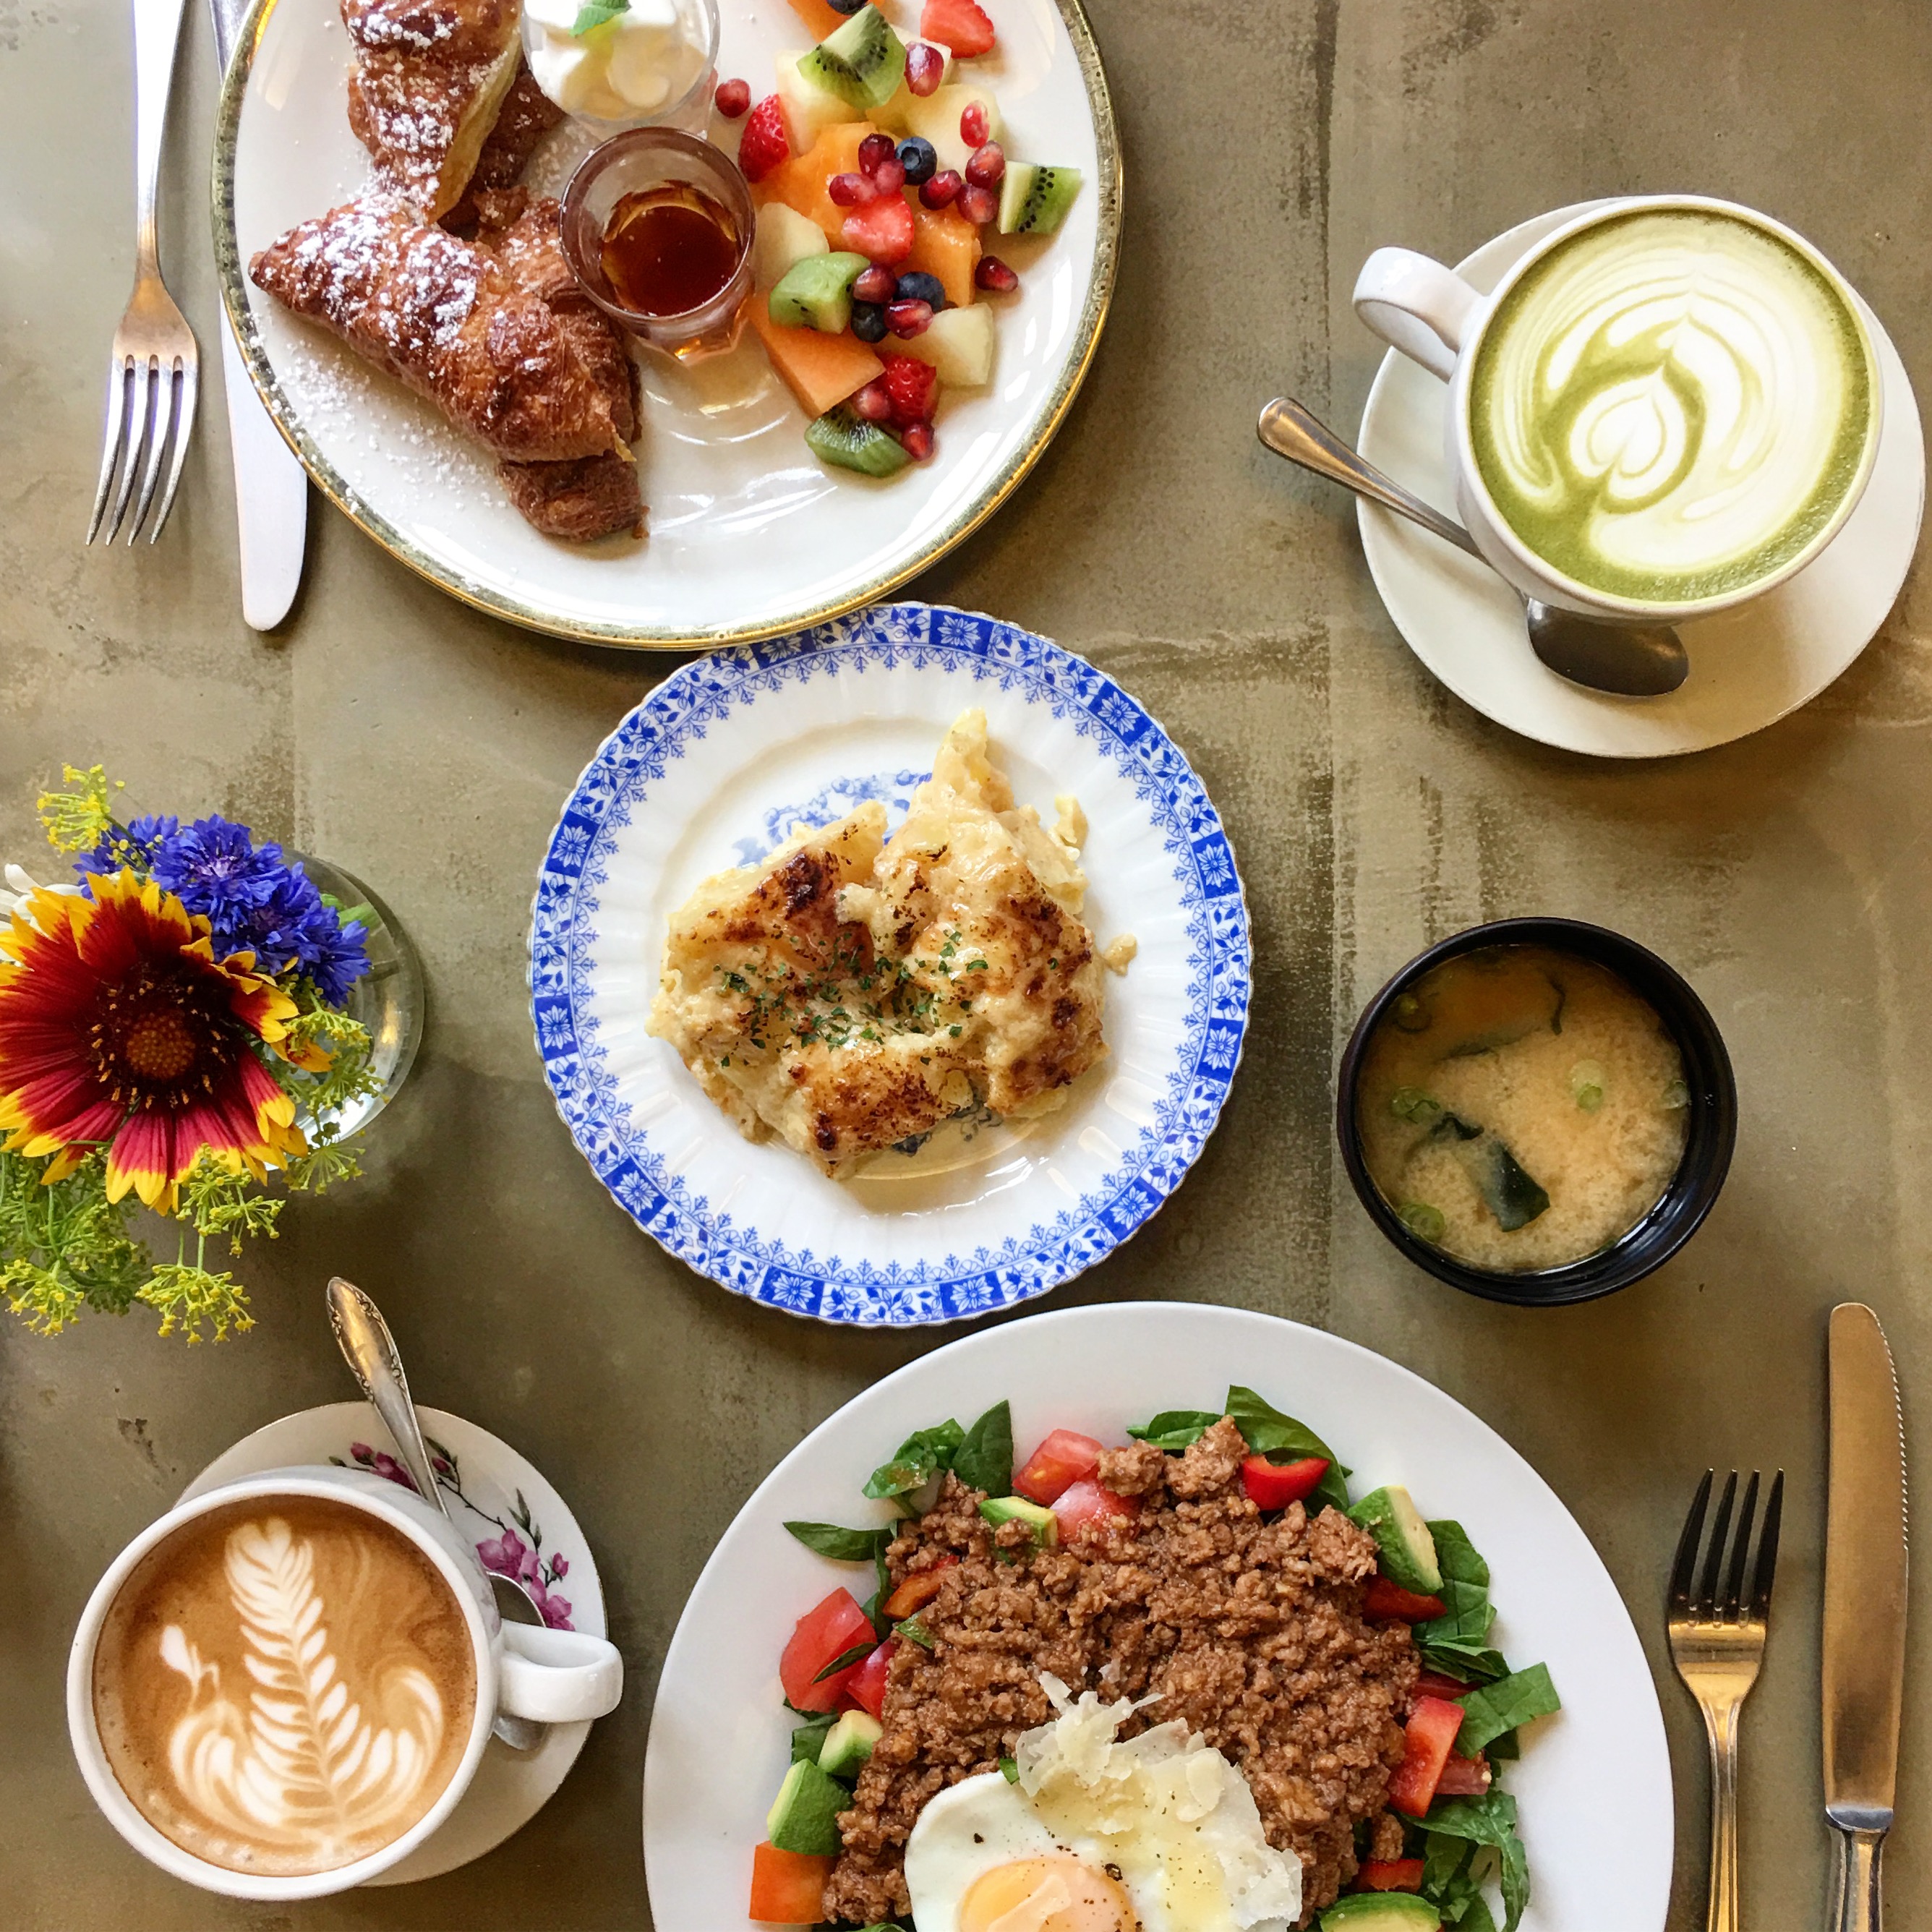 Brunch at the House of Small Wonders Berlin